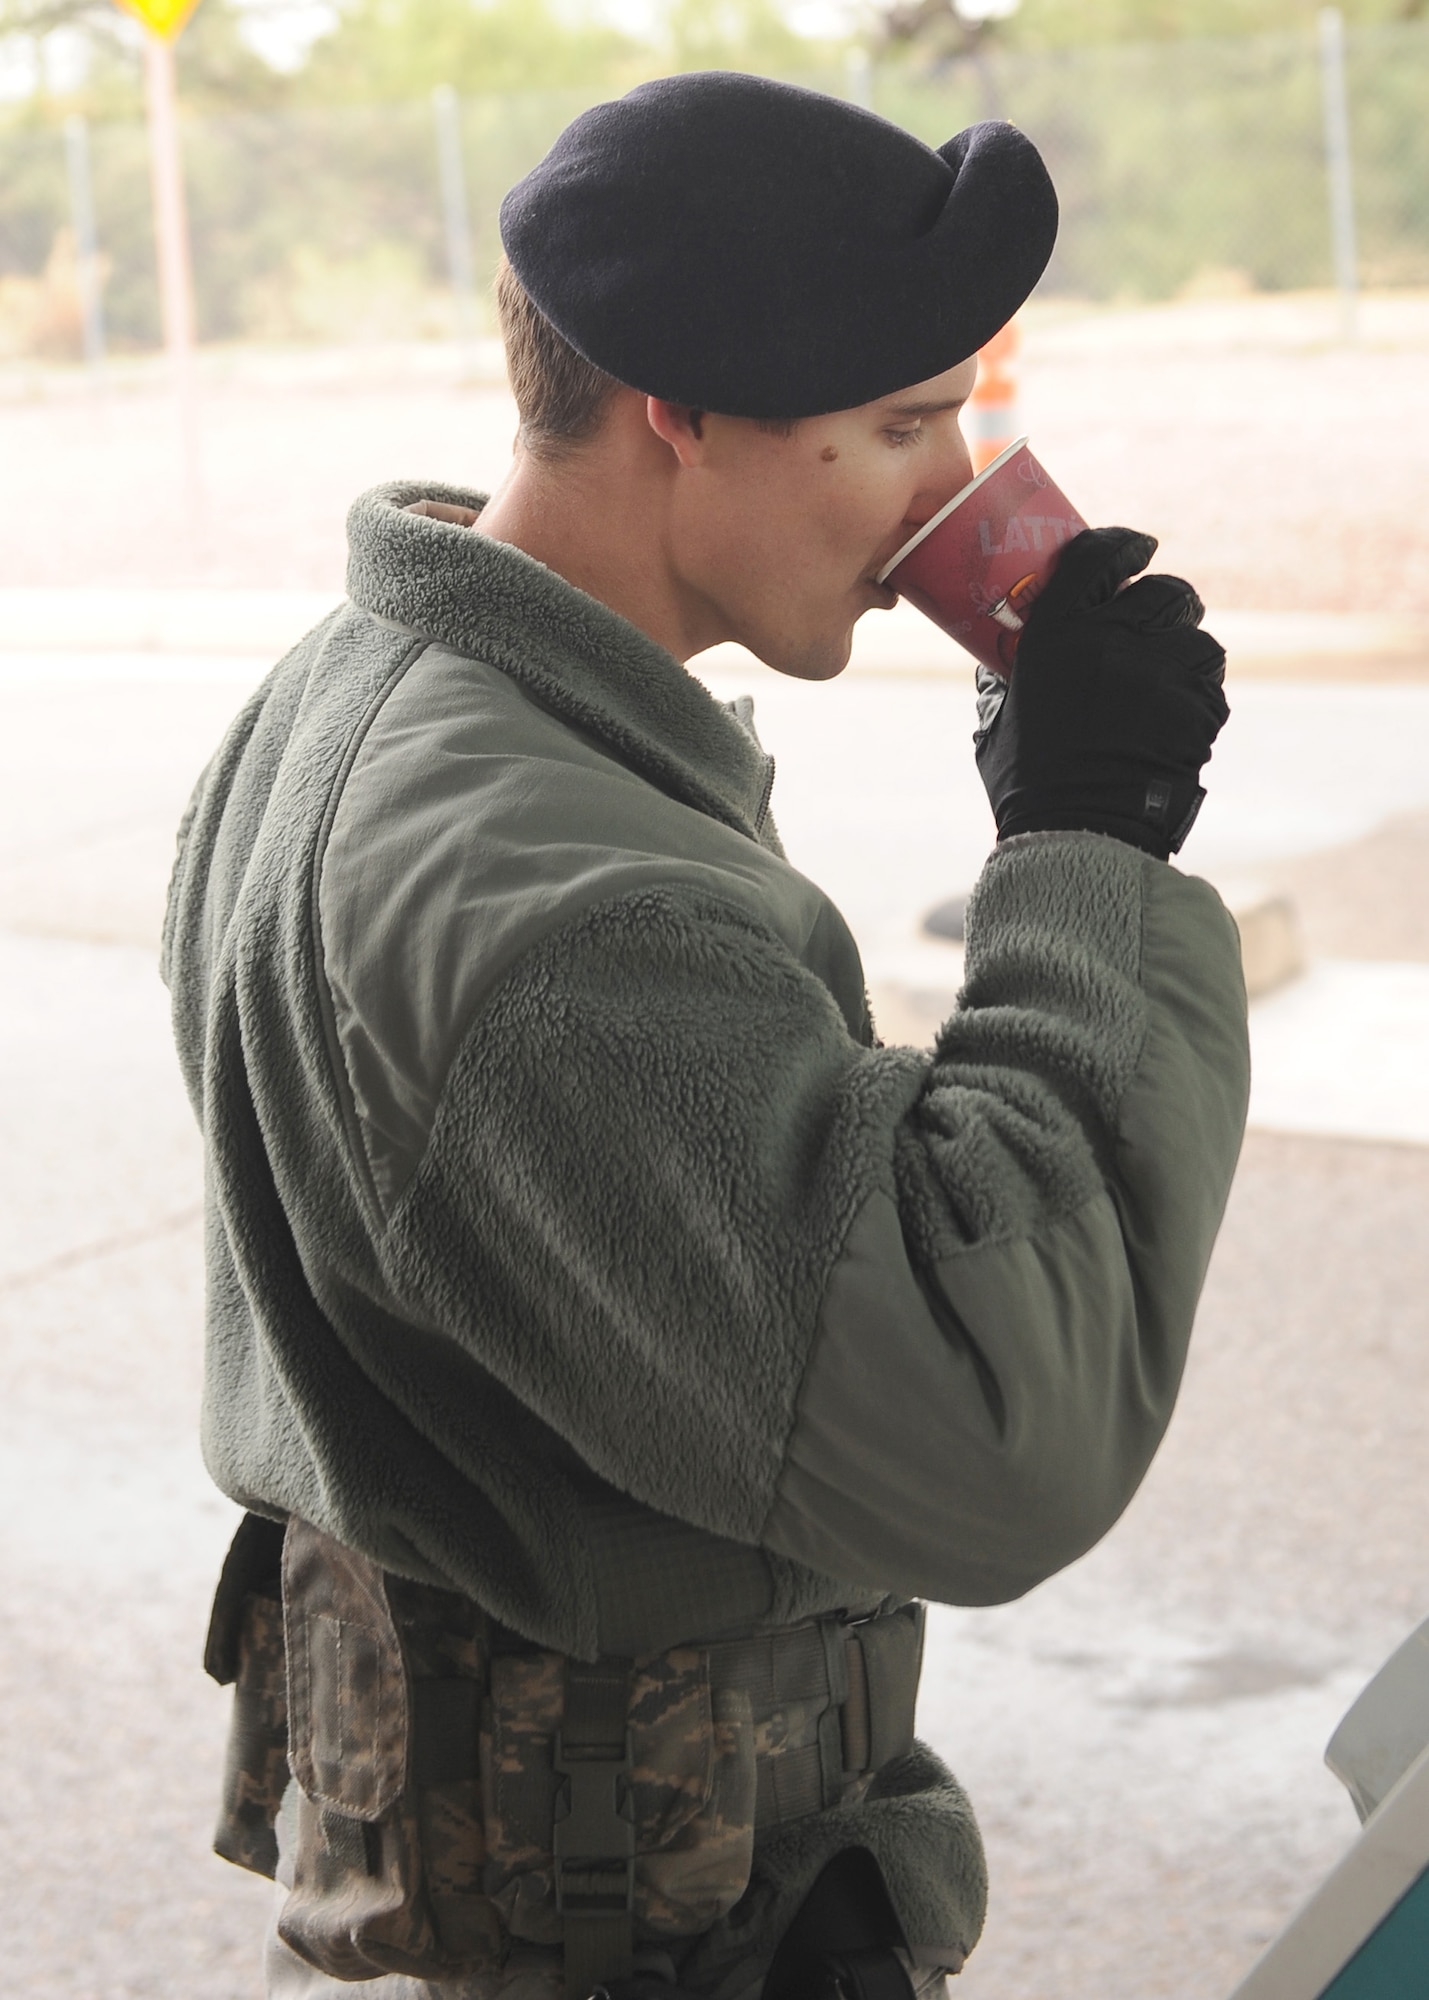 U.S. Air Force Senior Airman Christopher Mullis, 355th Security Forces Squadron, drinks a cup of hot chocolate at Davis-Monthan Air Force Base, Ariz., Dec. 14, 2015. The hot chocolate was provided by the Chaplain Corps and distributed to all SFS Airmen working at entry control points around D-M. (U.S. Air Force photo by Senior Airman Cheyenne A. Powers/ Released)
